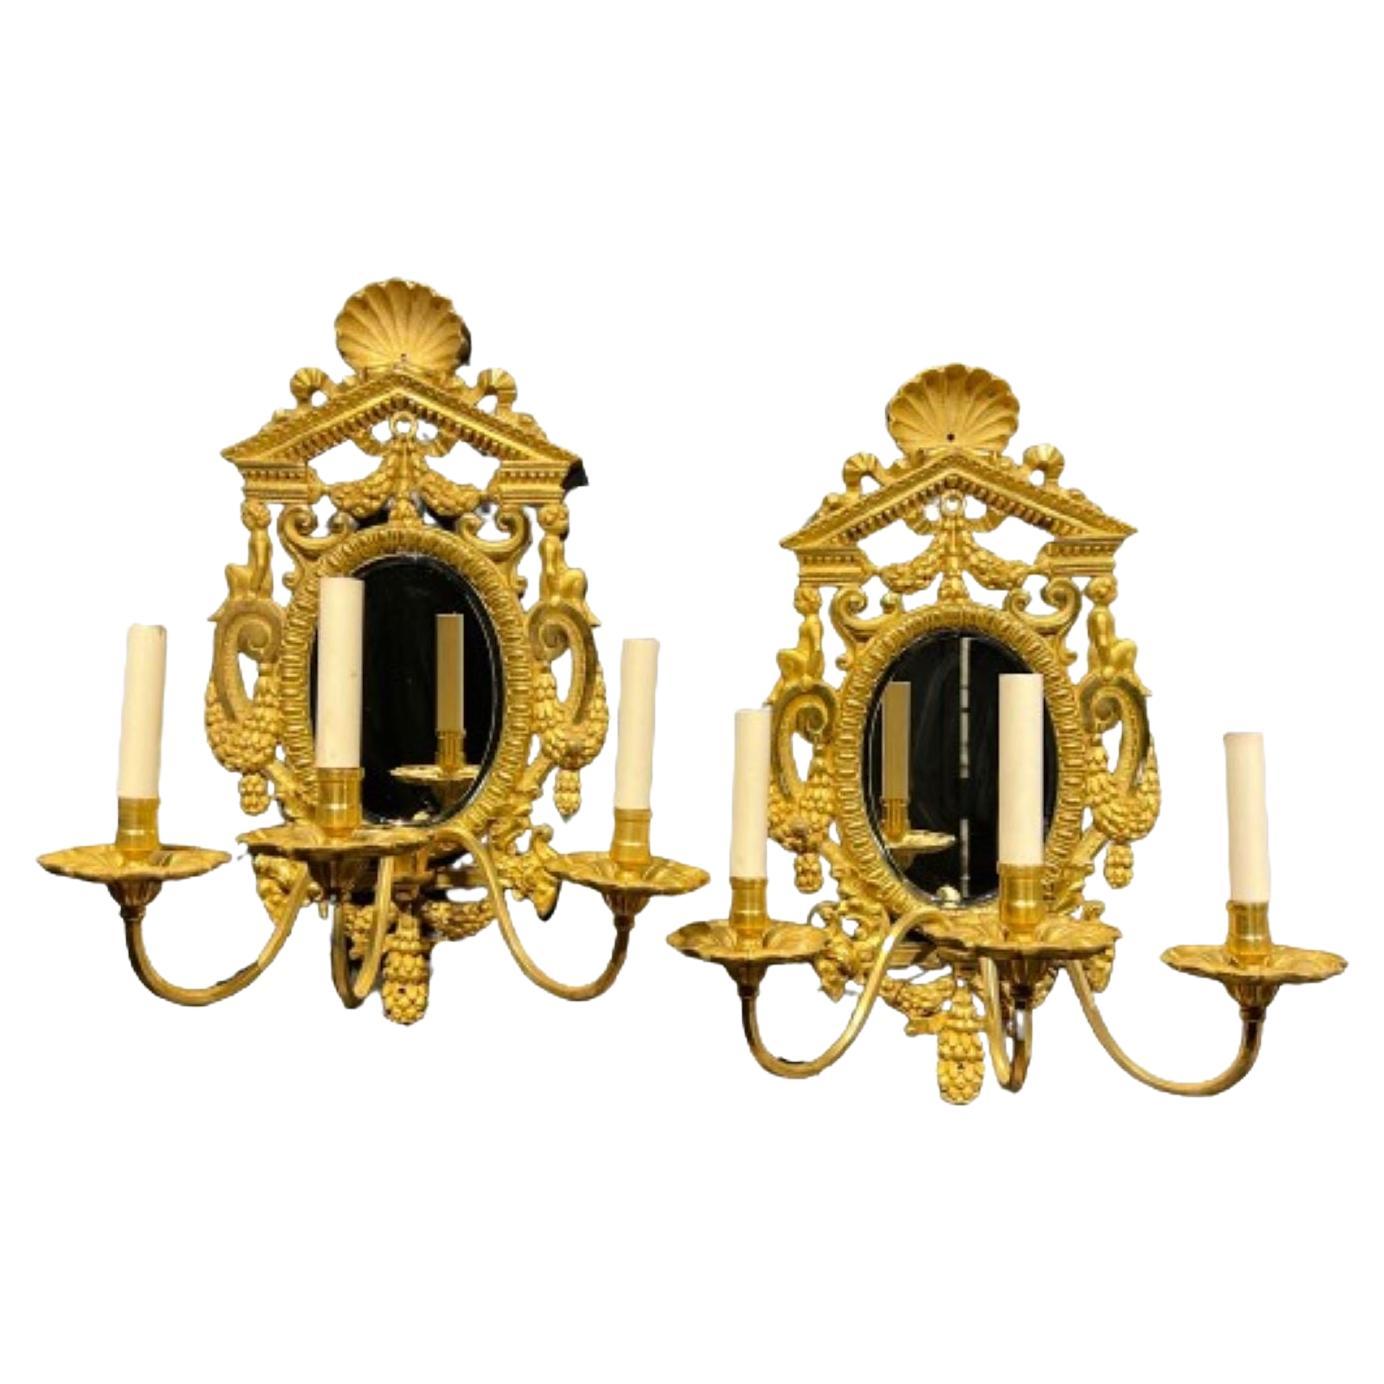 1900's Caldwell Neoclassic Gilt Bronze and Mirror Sconces 3 Lights